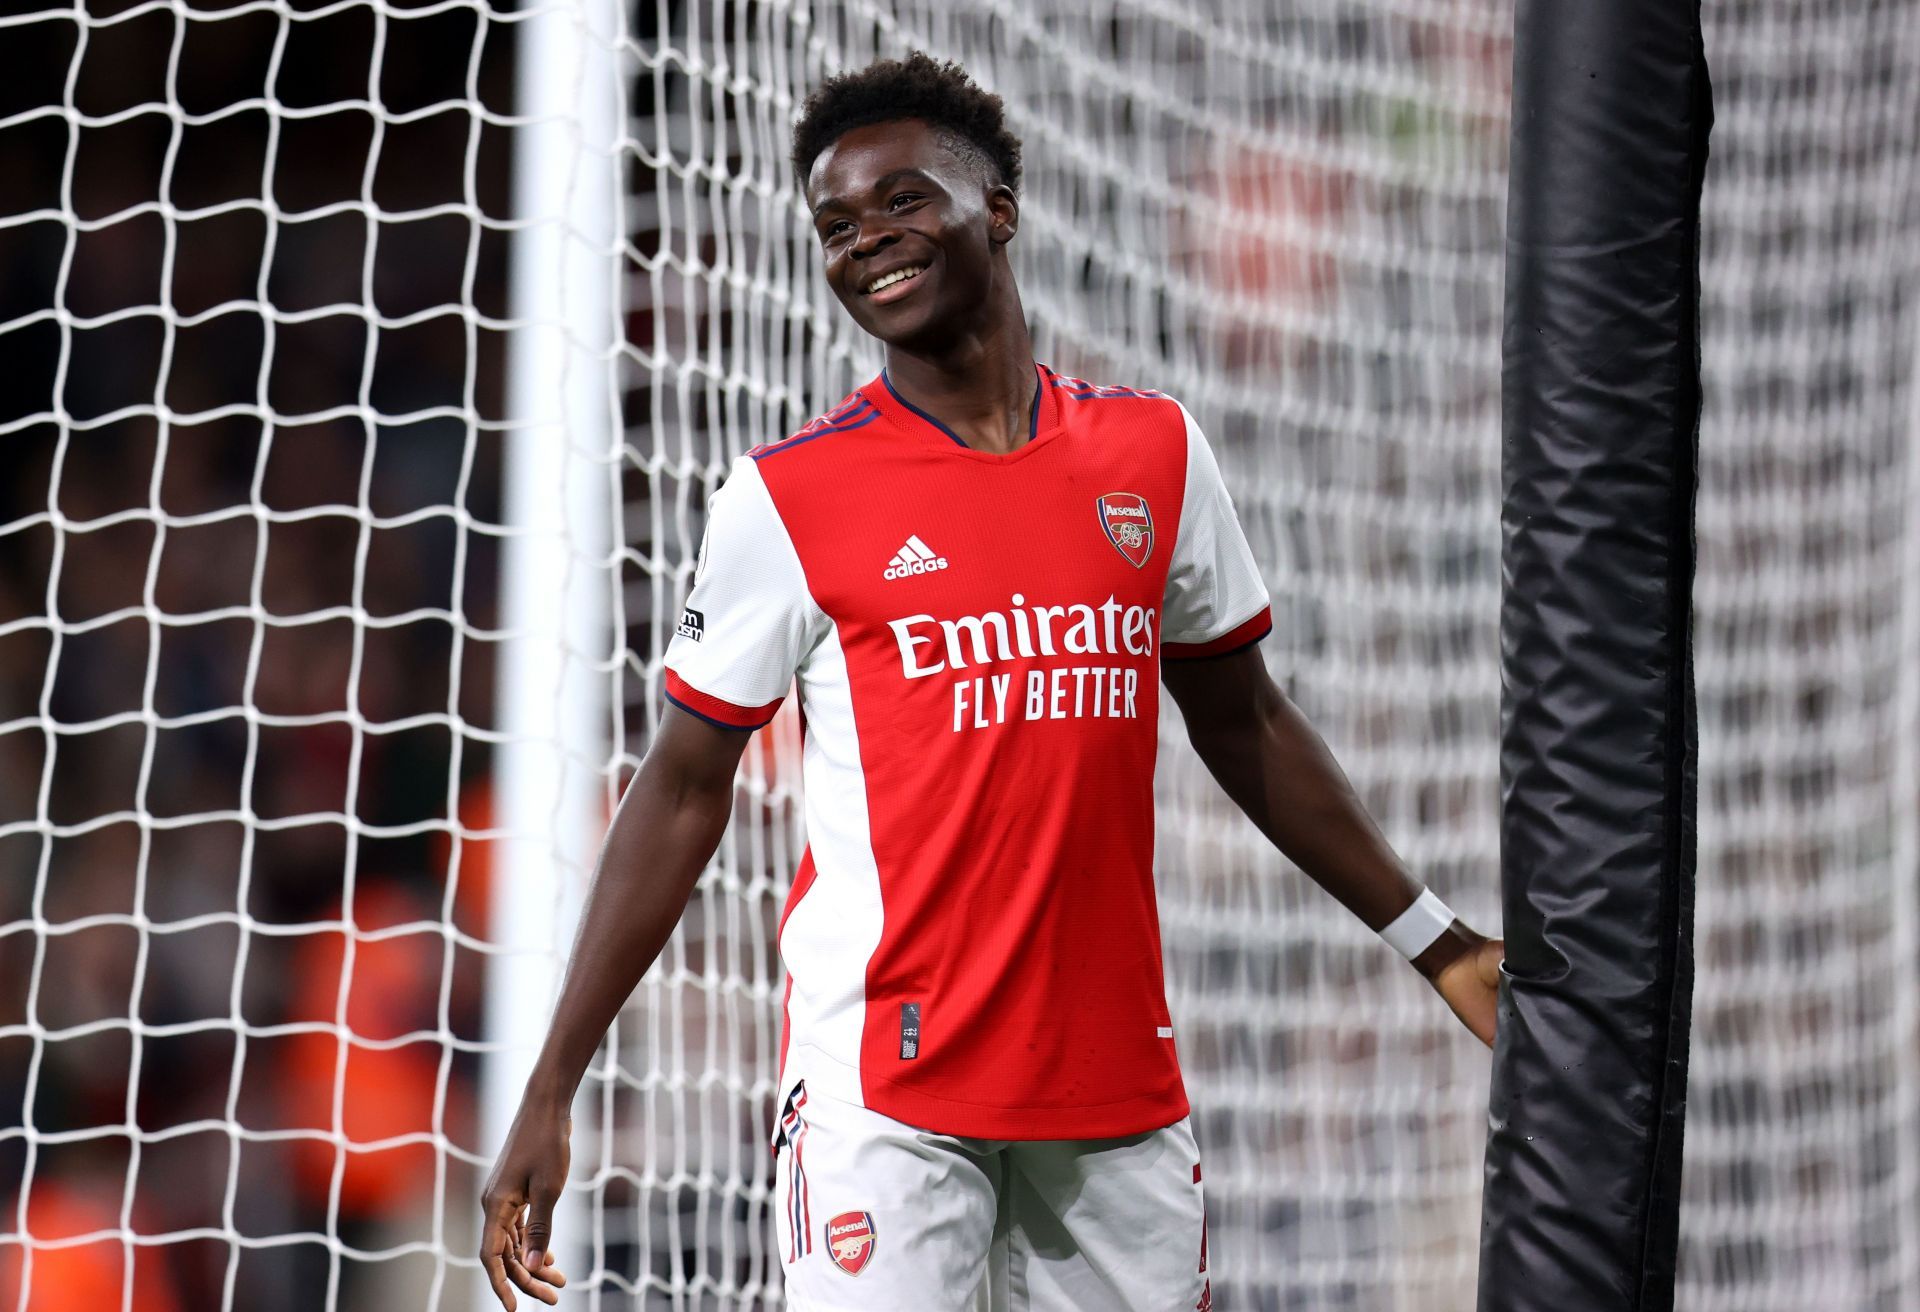 Saka has formed a formidable partnership with Smith Rowe at Arsenal